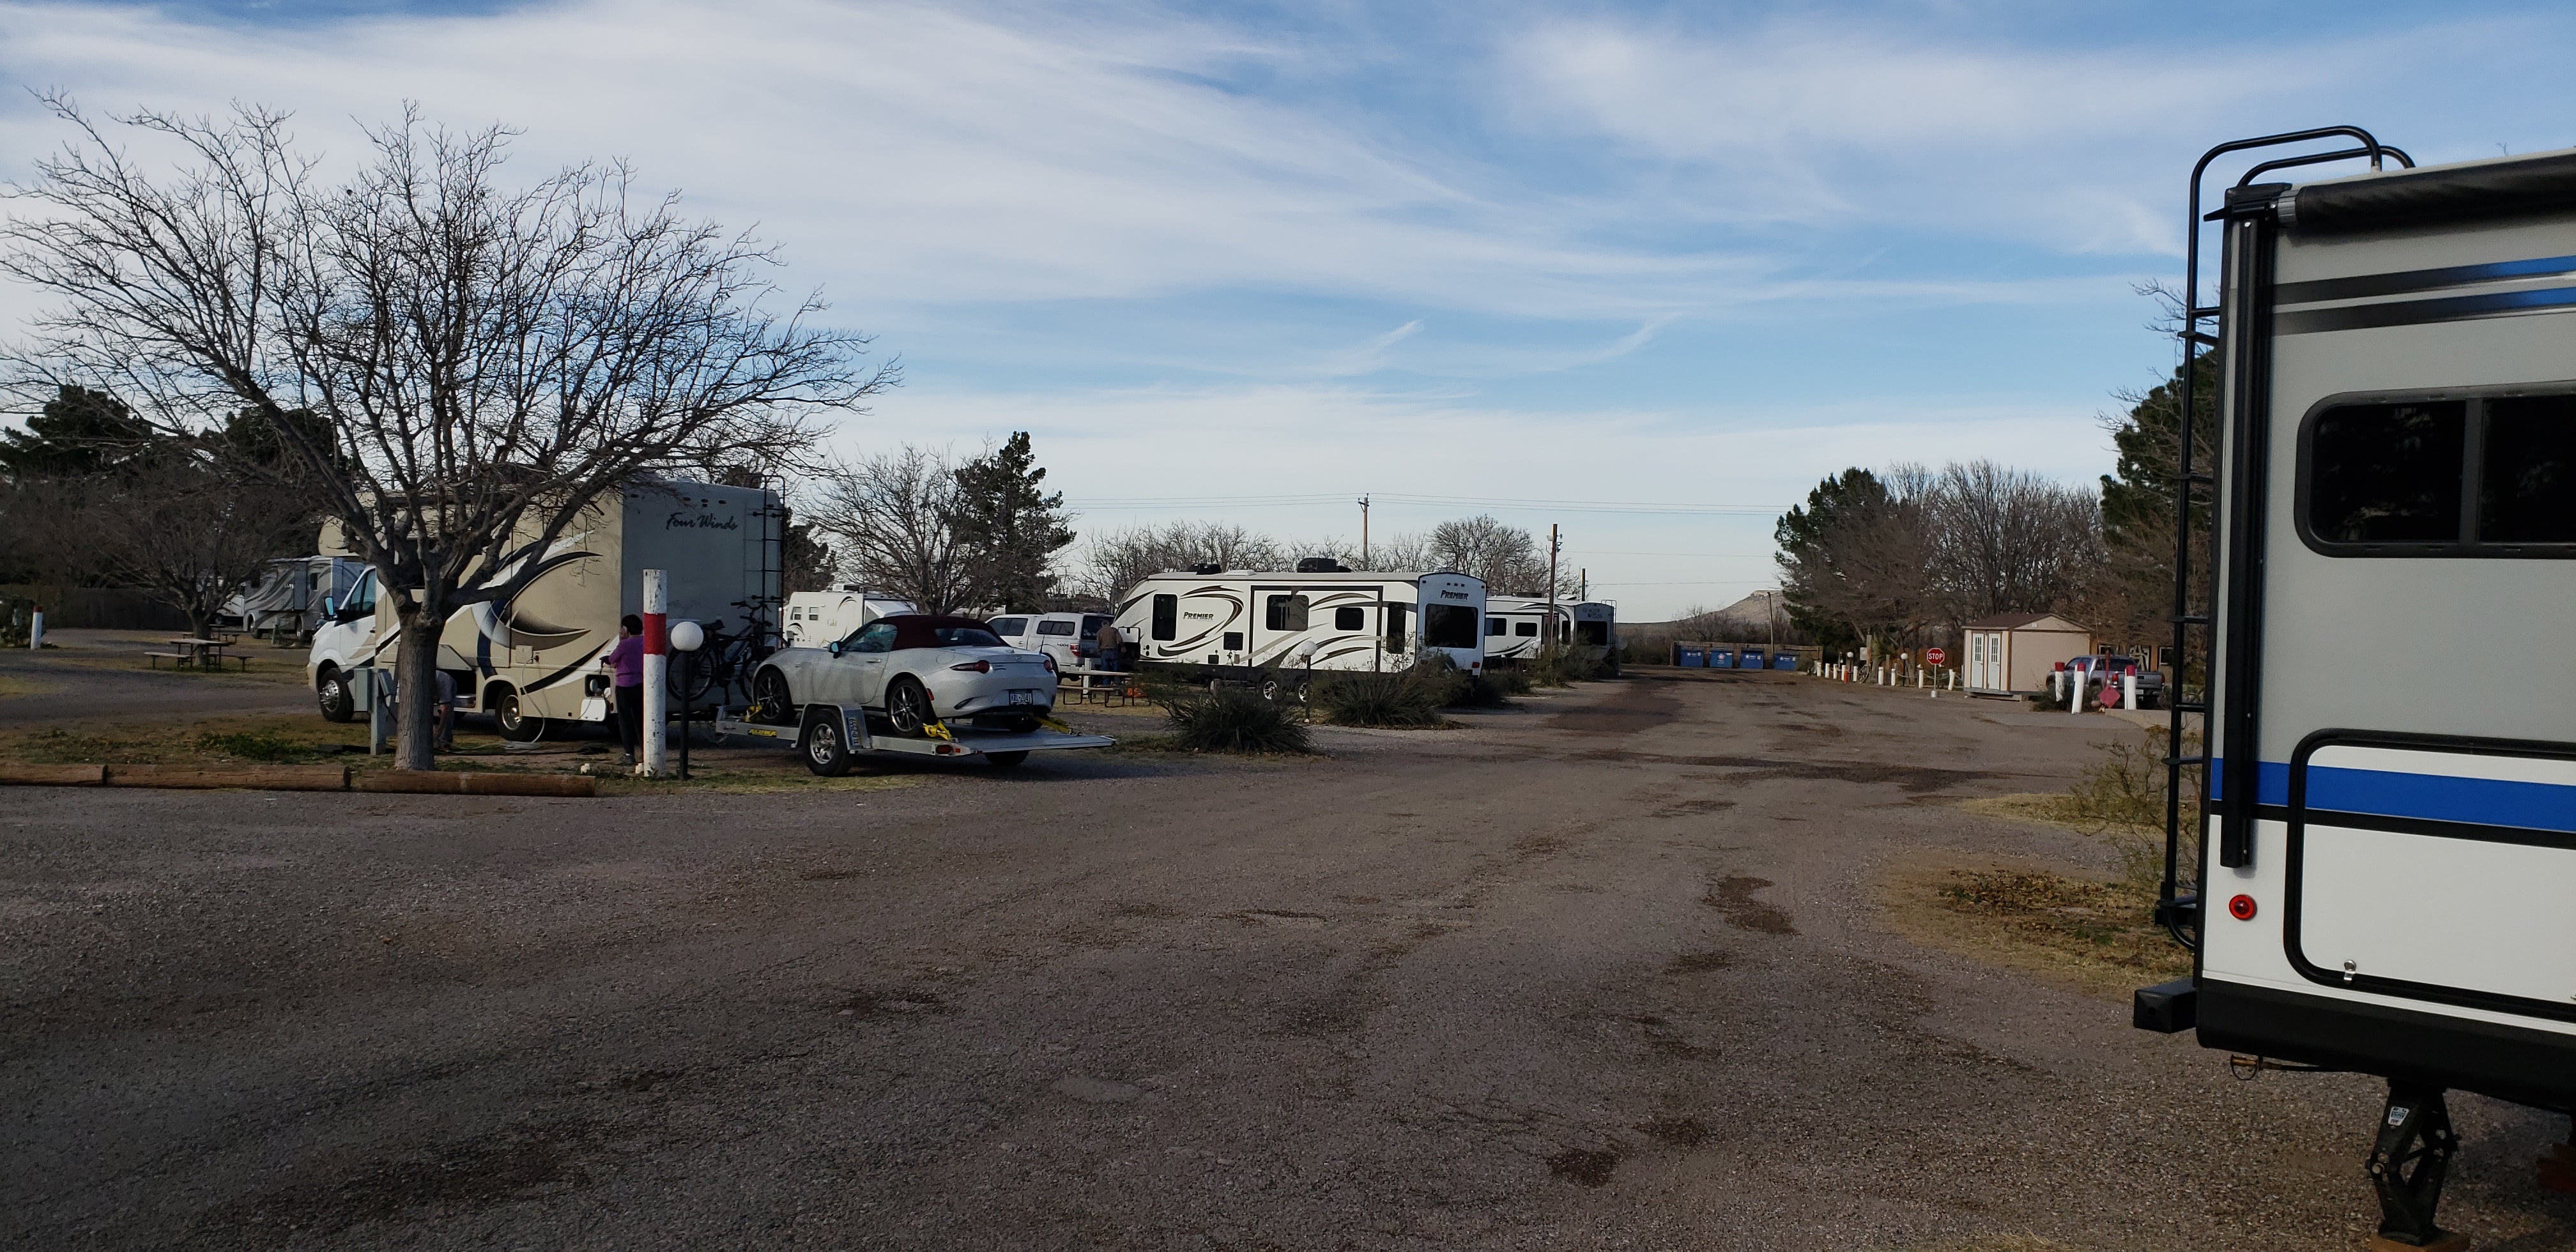 The campground